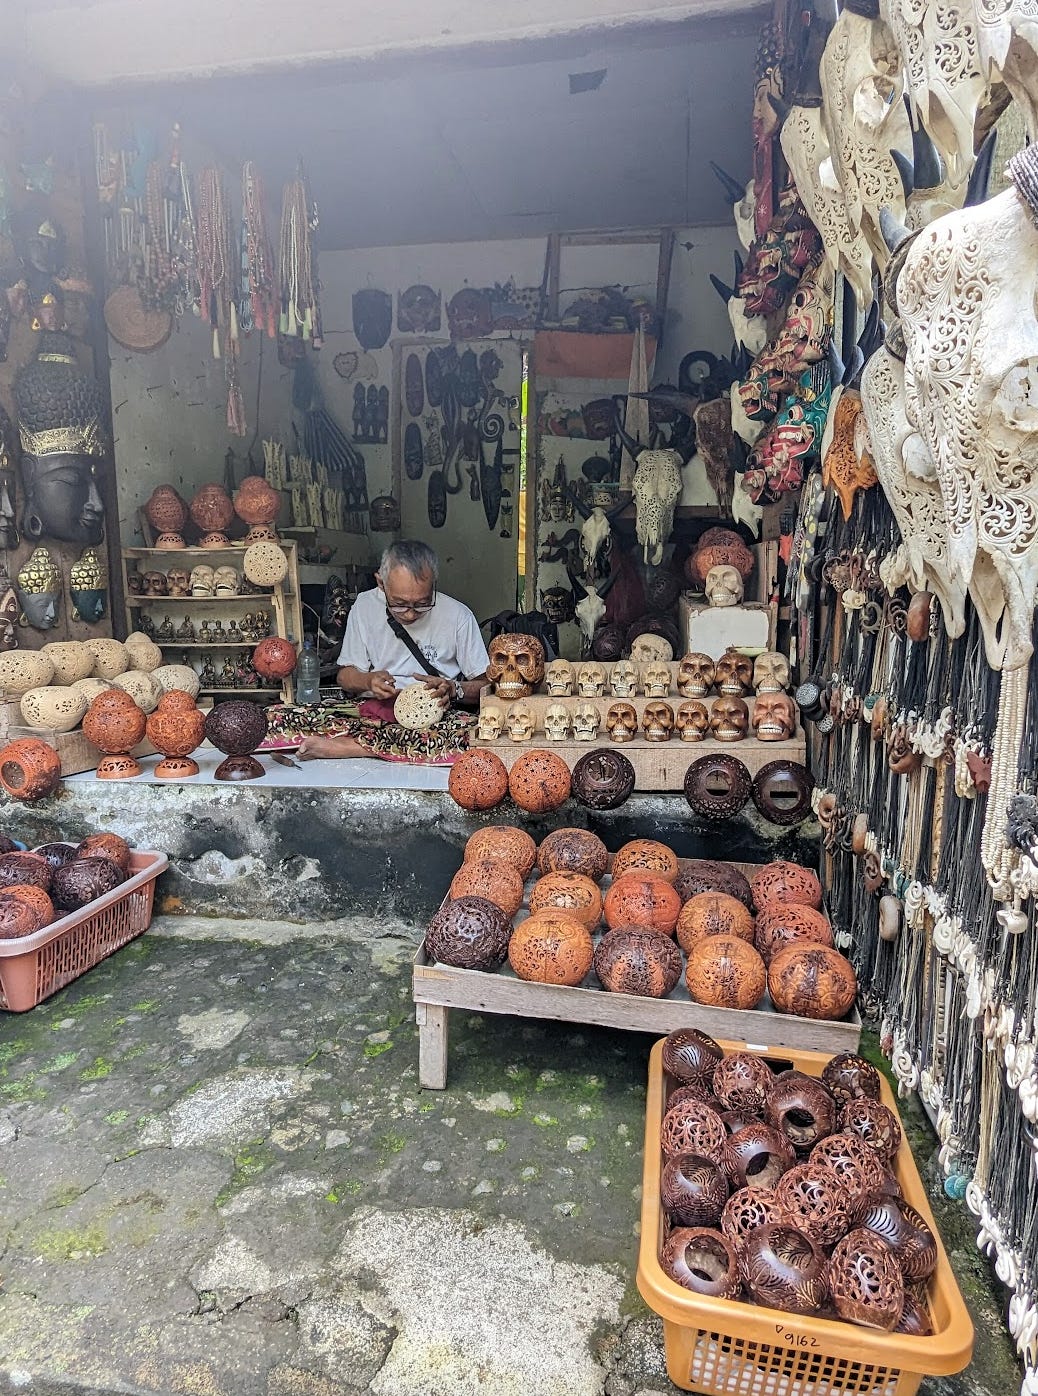 An old man is focused on creating small, tedious, and intricate shapes and designs on a piece of round wood. He is surrounded by his other wood pieces he handmade